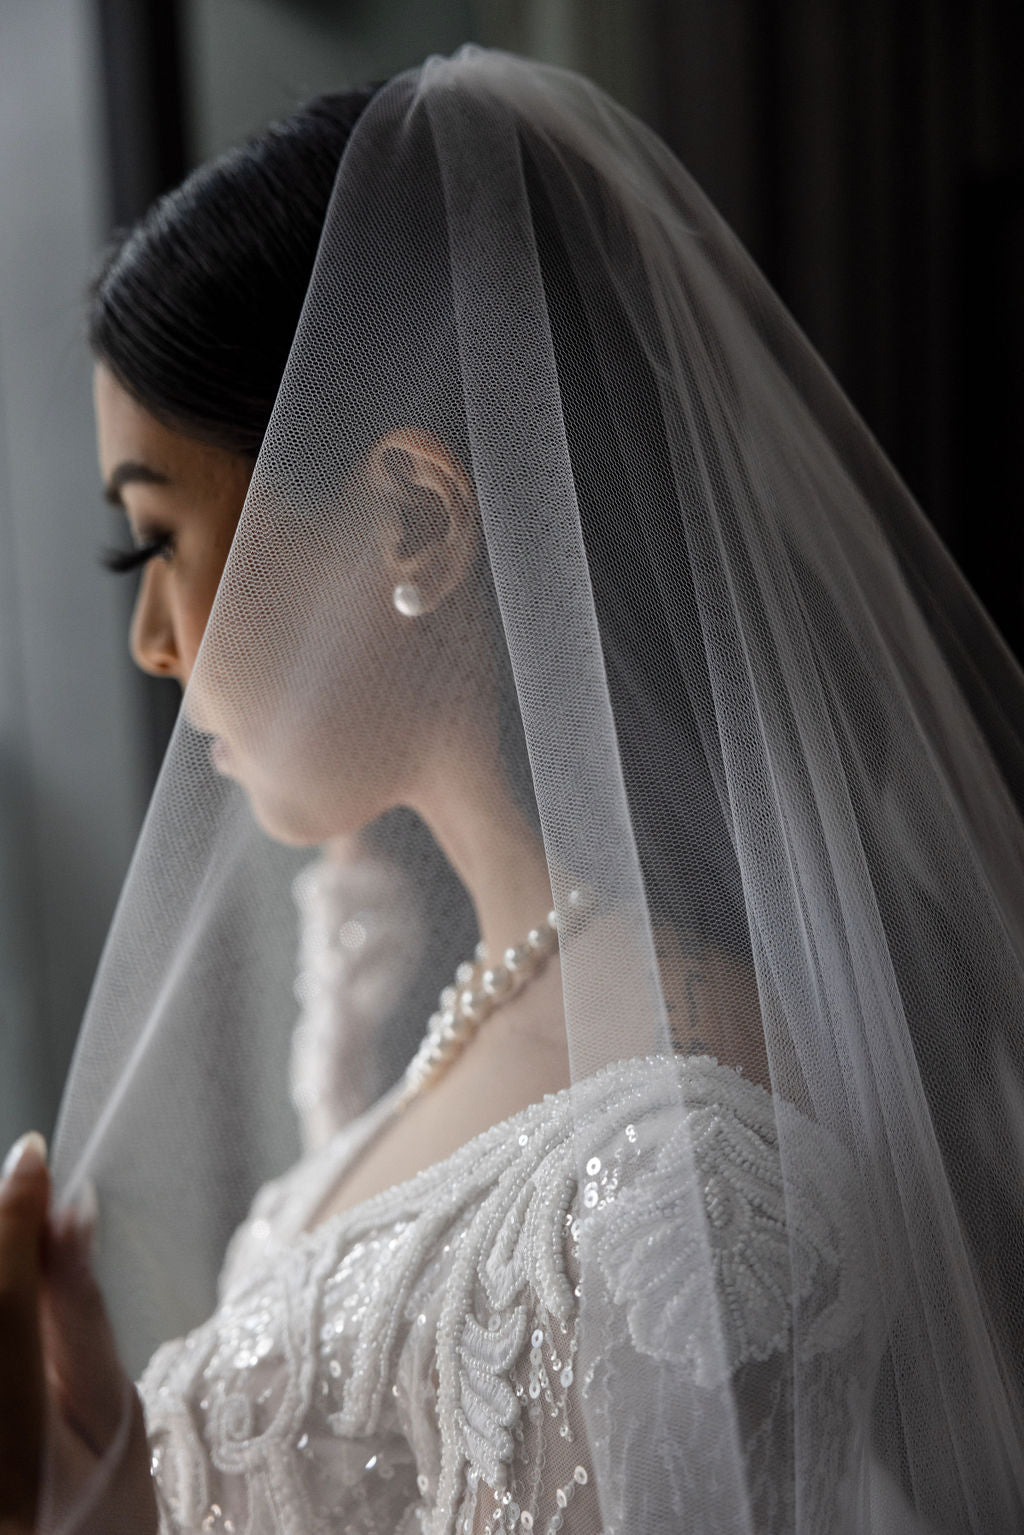 woman wearing wedding veil and lace dress